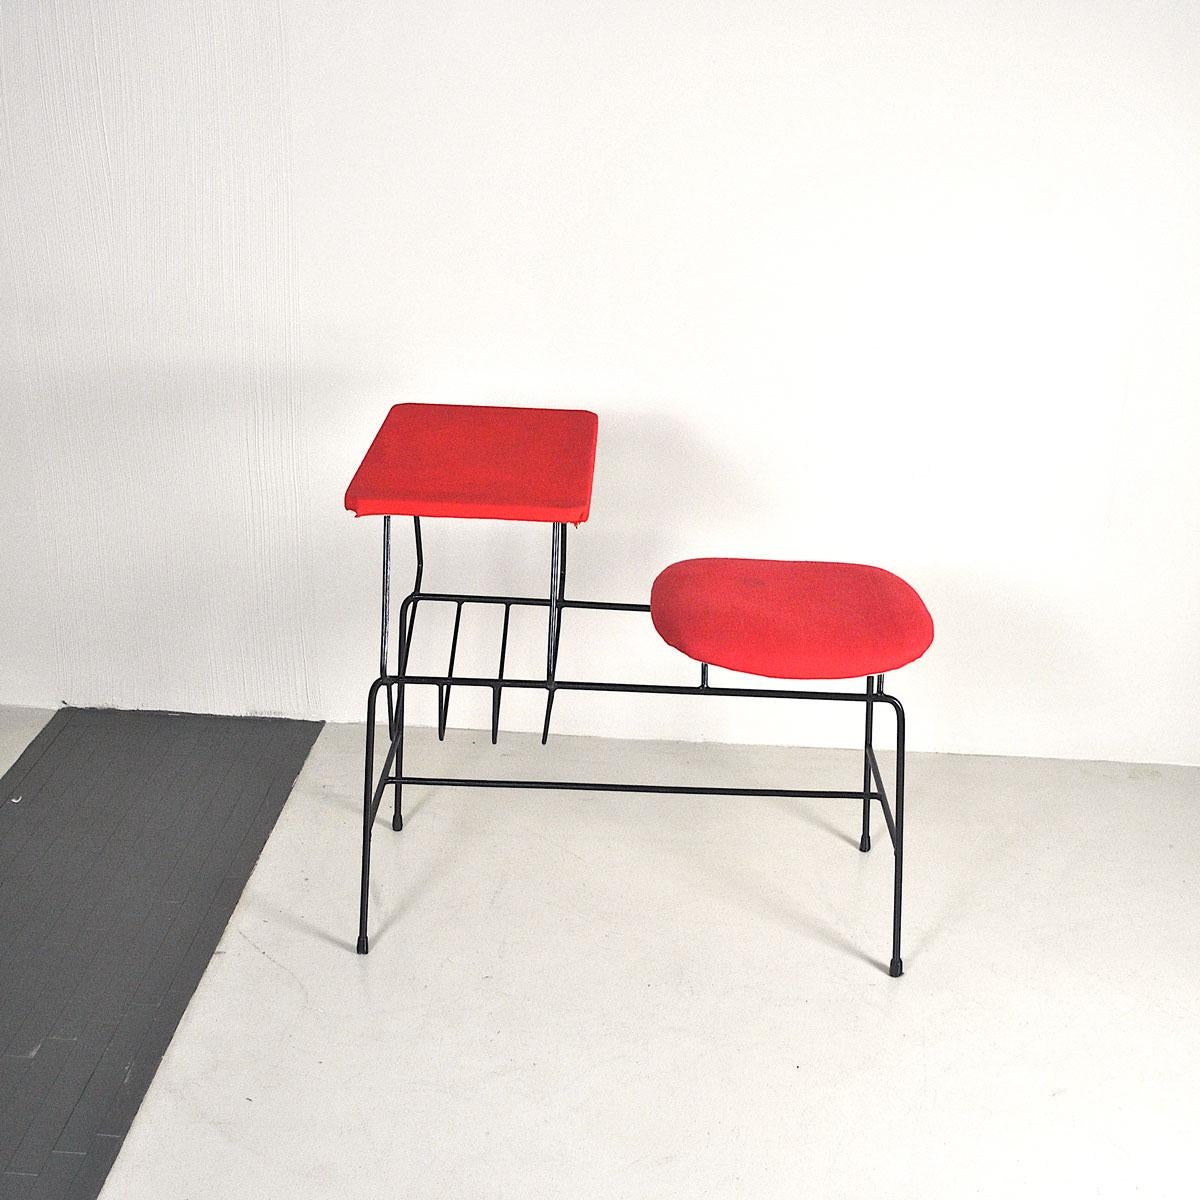 A typical small Italian 1960s desk bench with seat and small top and carries magazines.